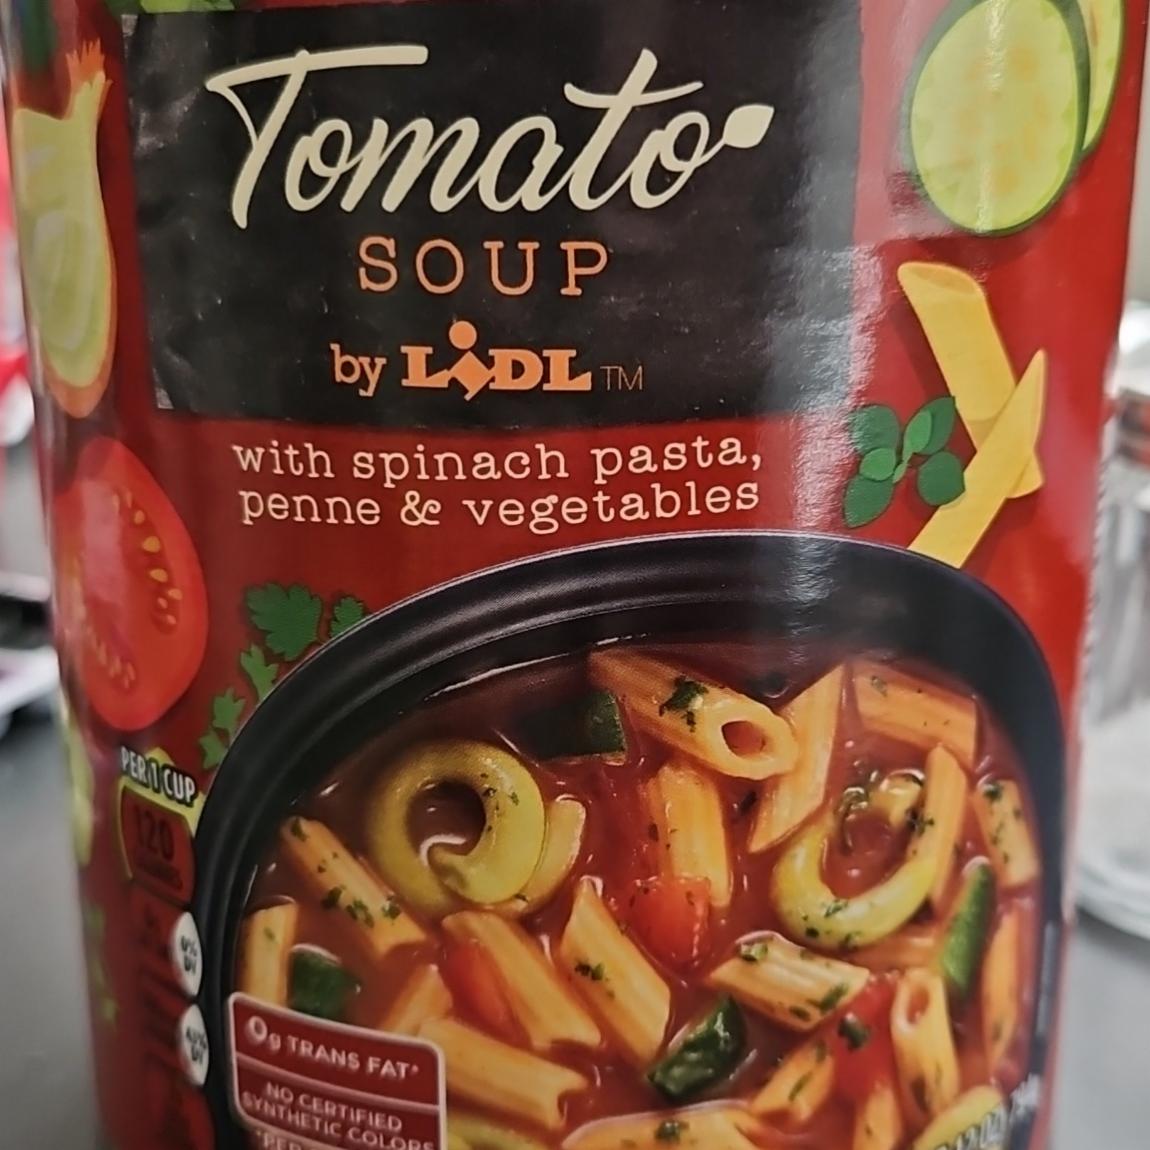 Fotografie - Tomato soup with spinach pasta, penne & vegetables by Lidl